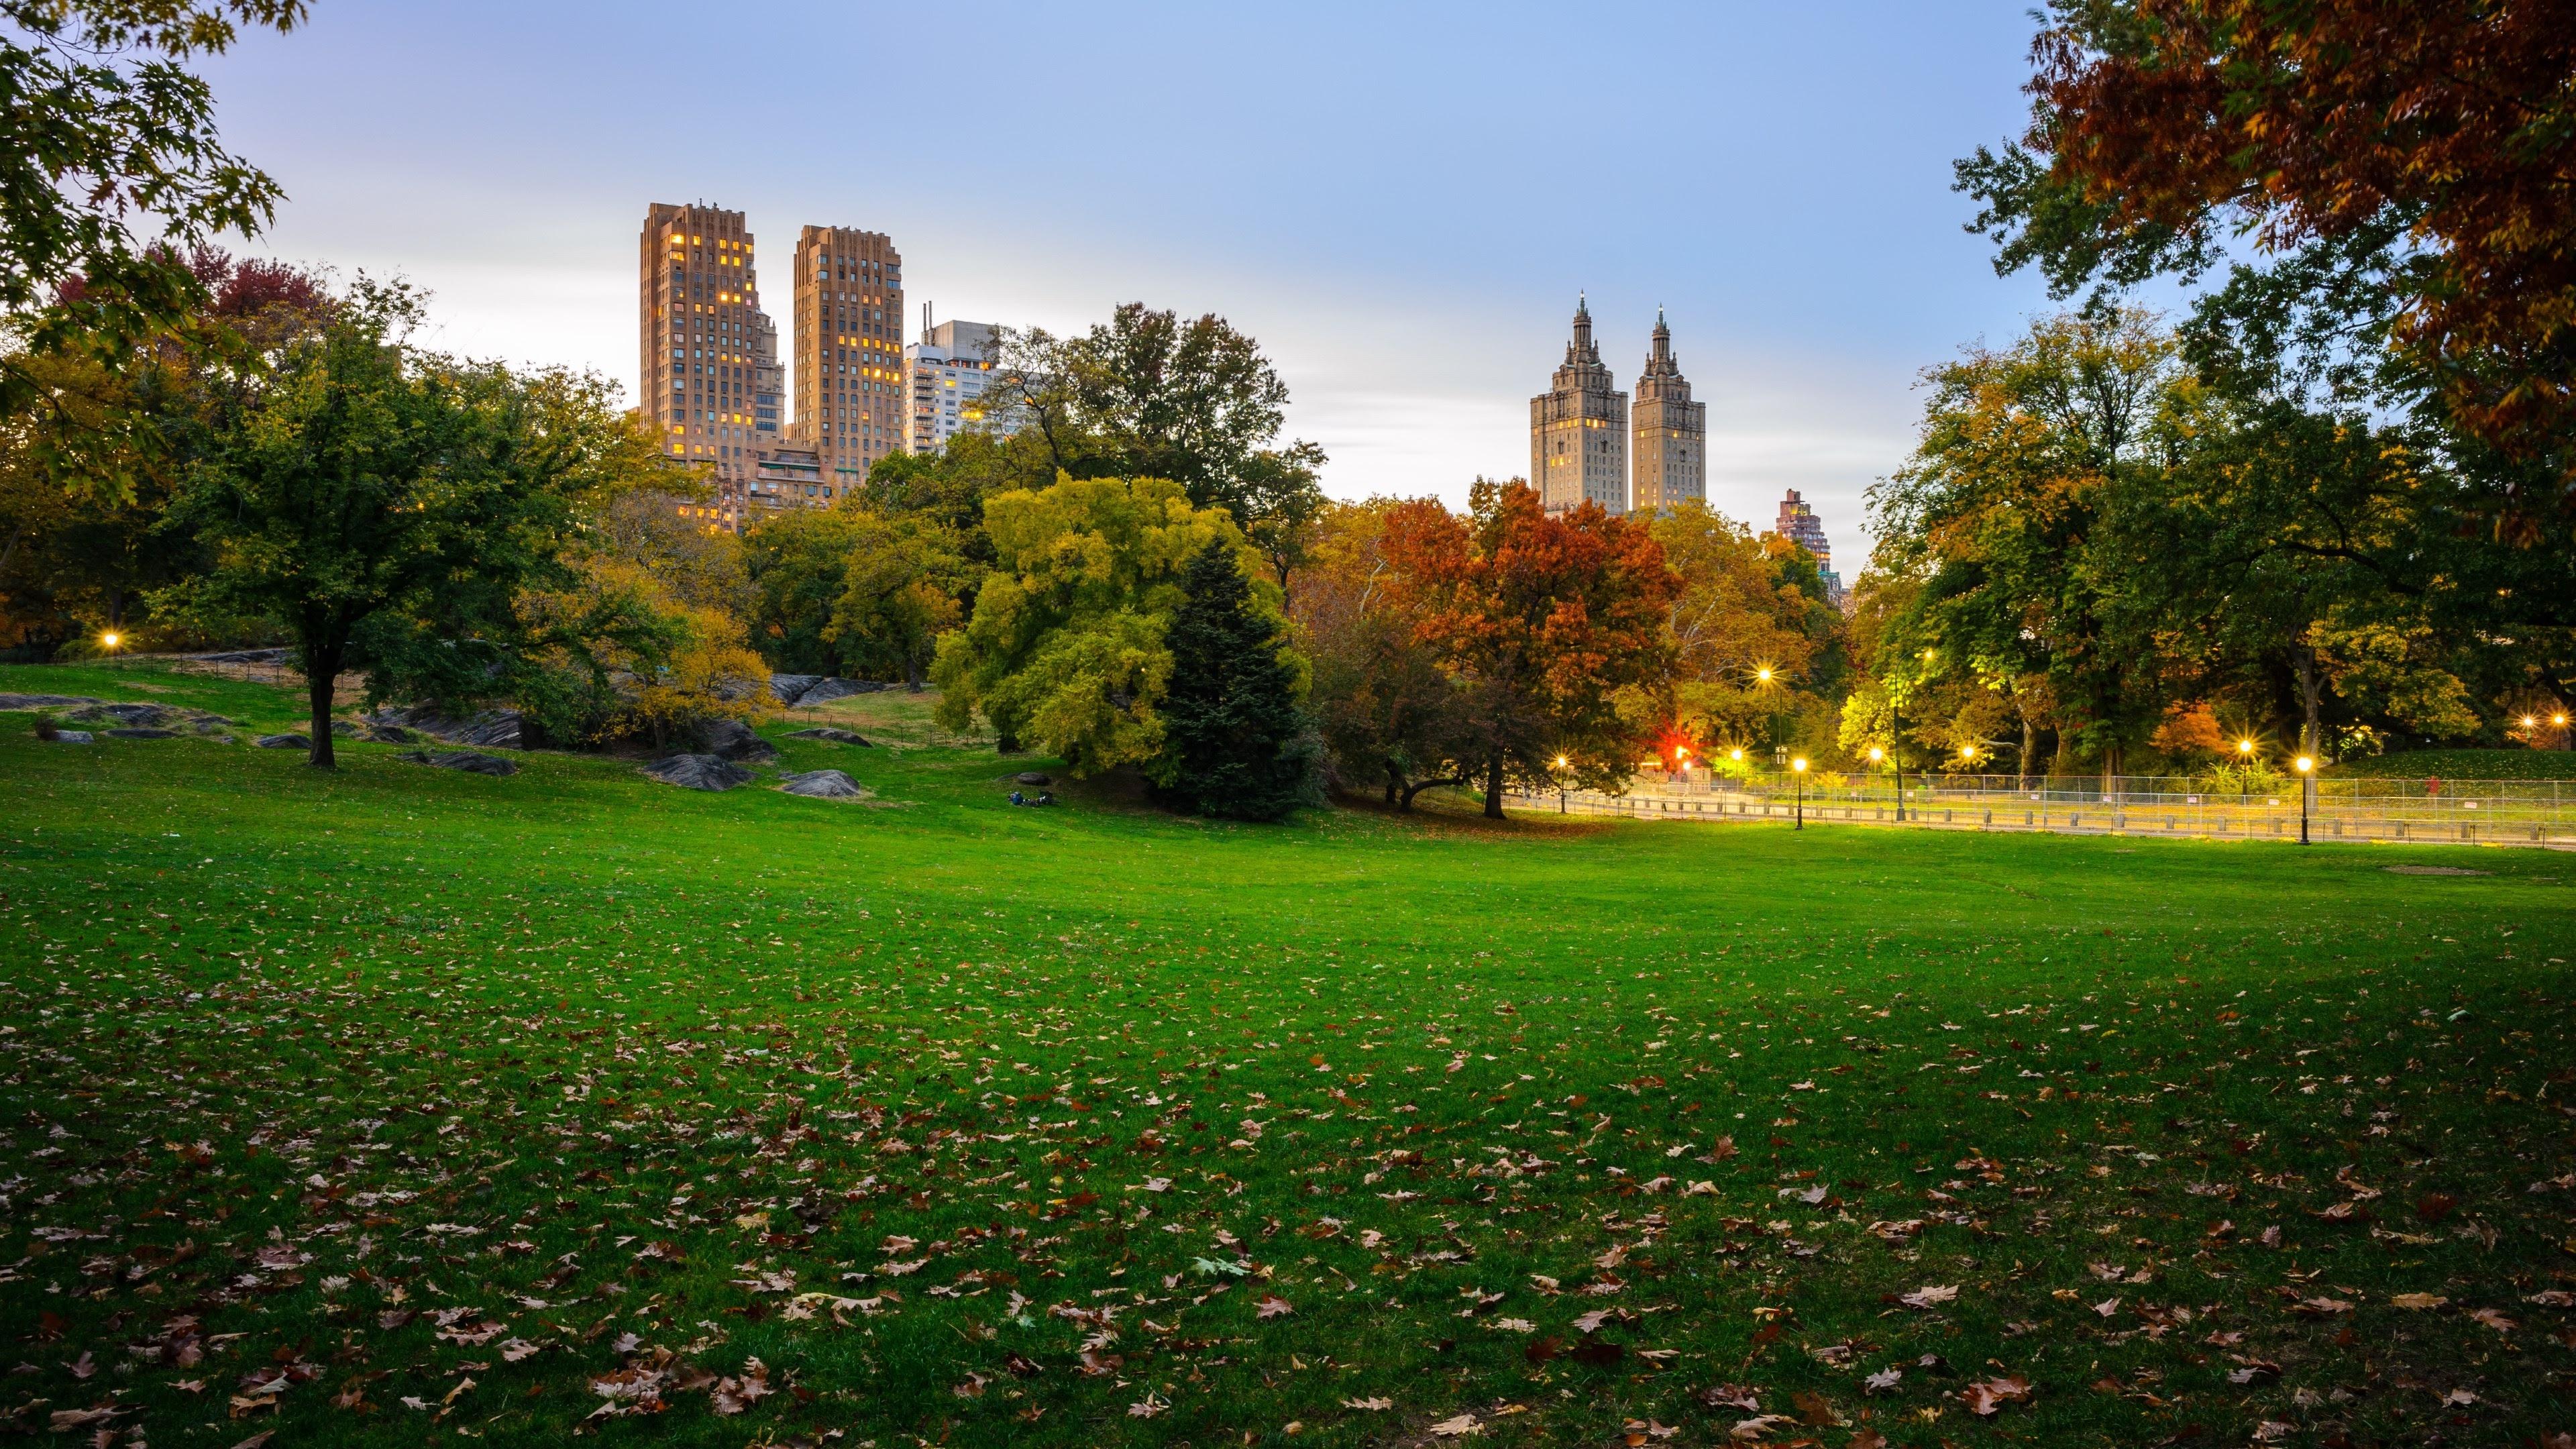 Download 3840x2160 New York Central Park, Buildings Wallpaper